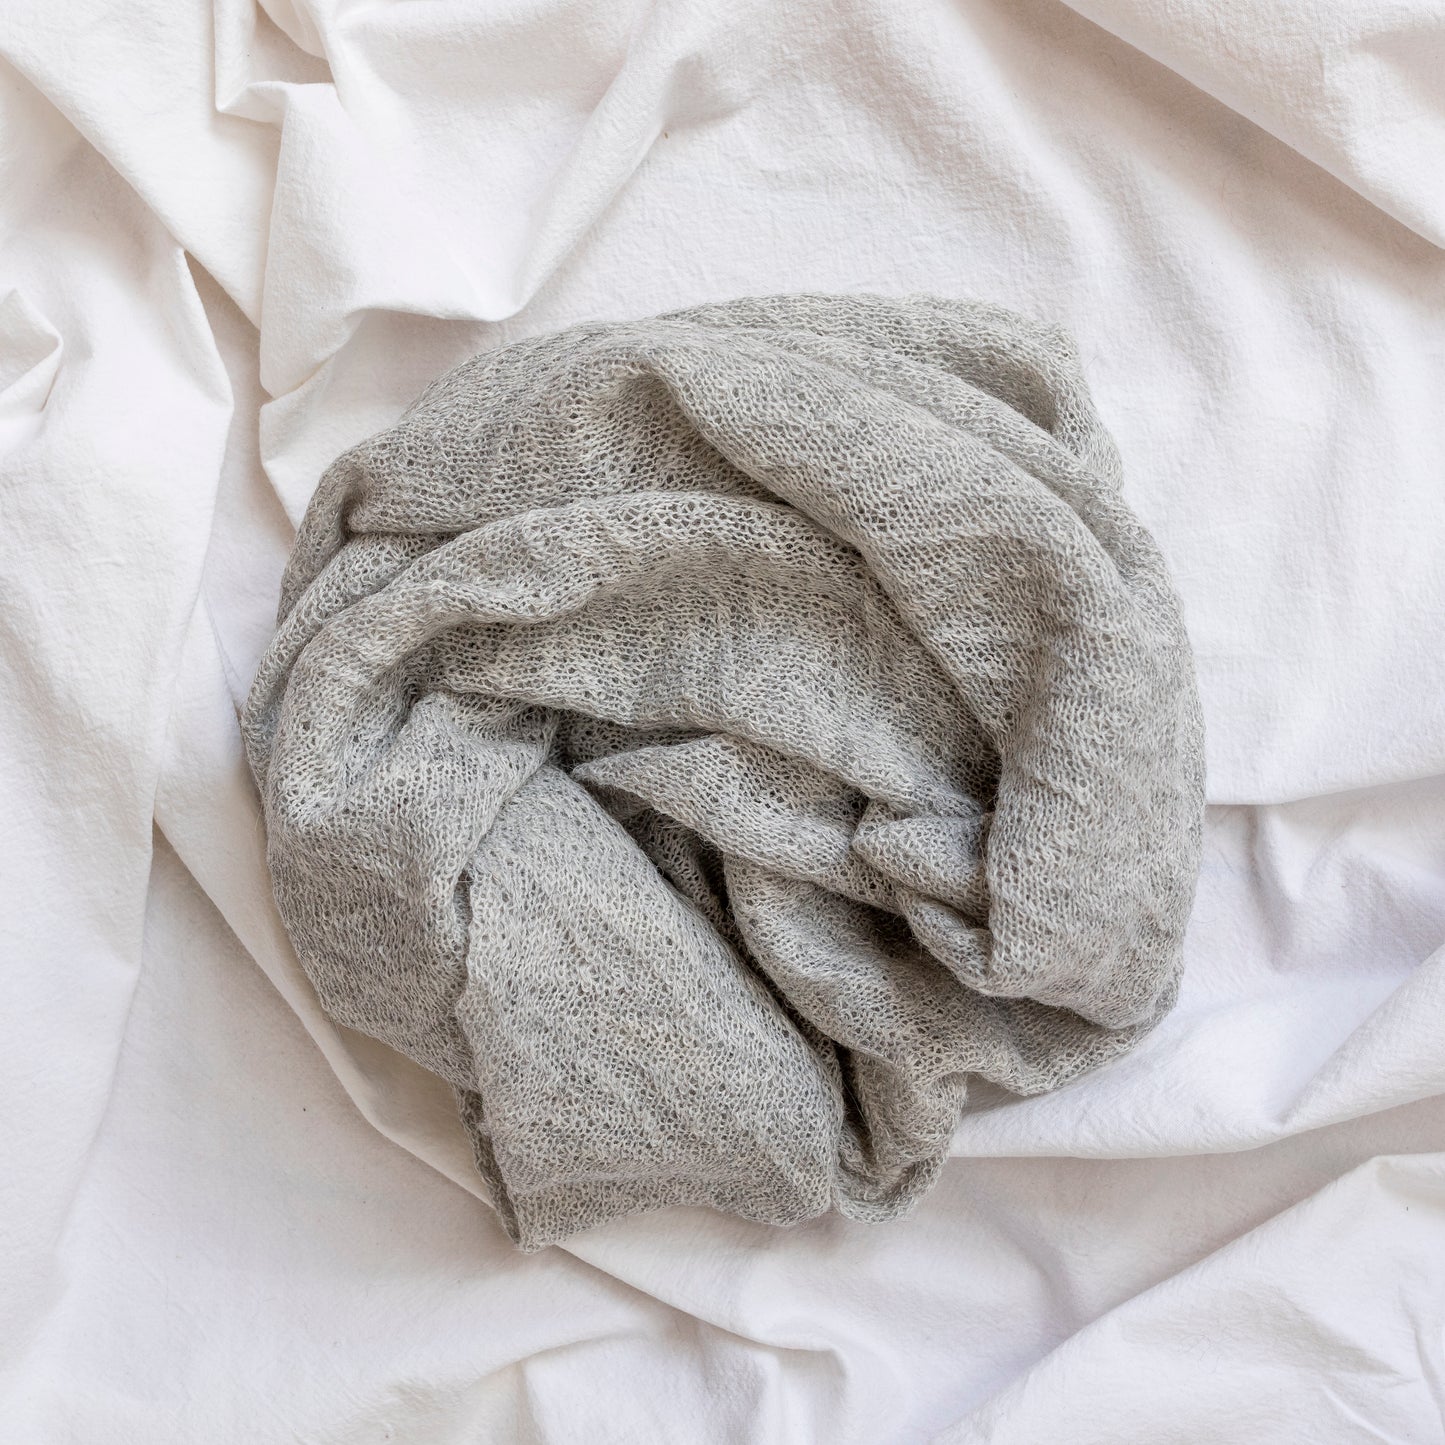 Soft grey coloured lightweight and delicately woven scarf. Hand-made by artisans.